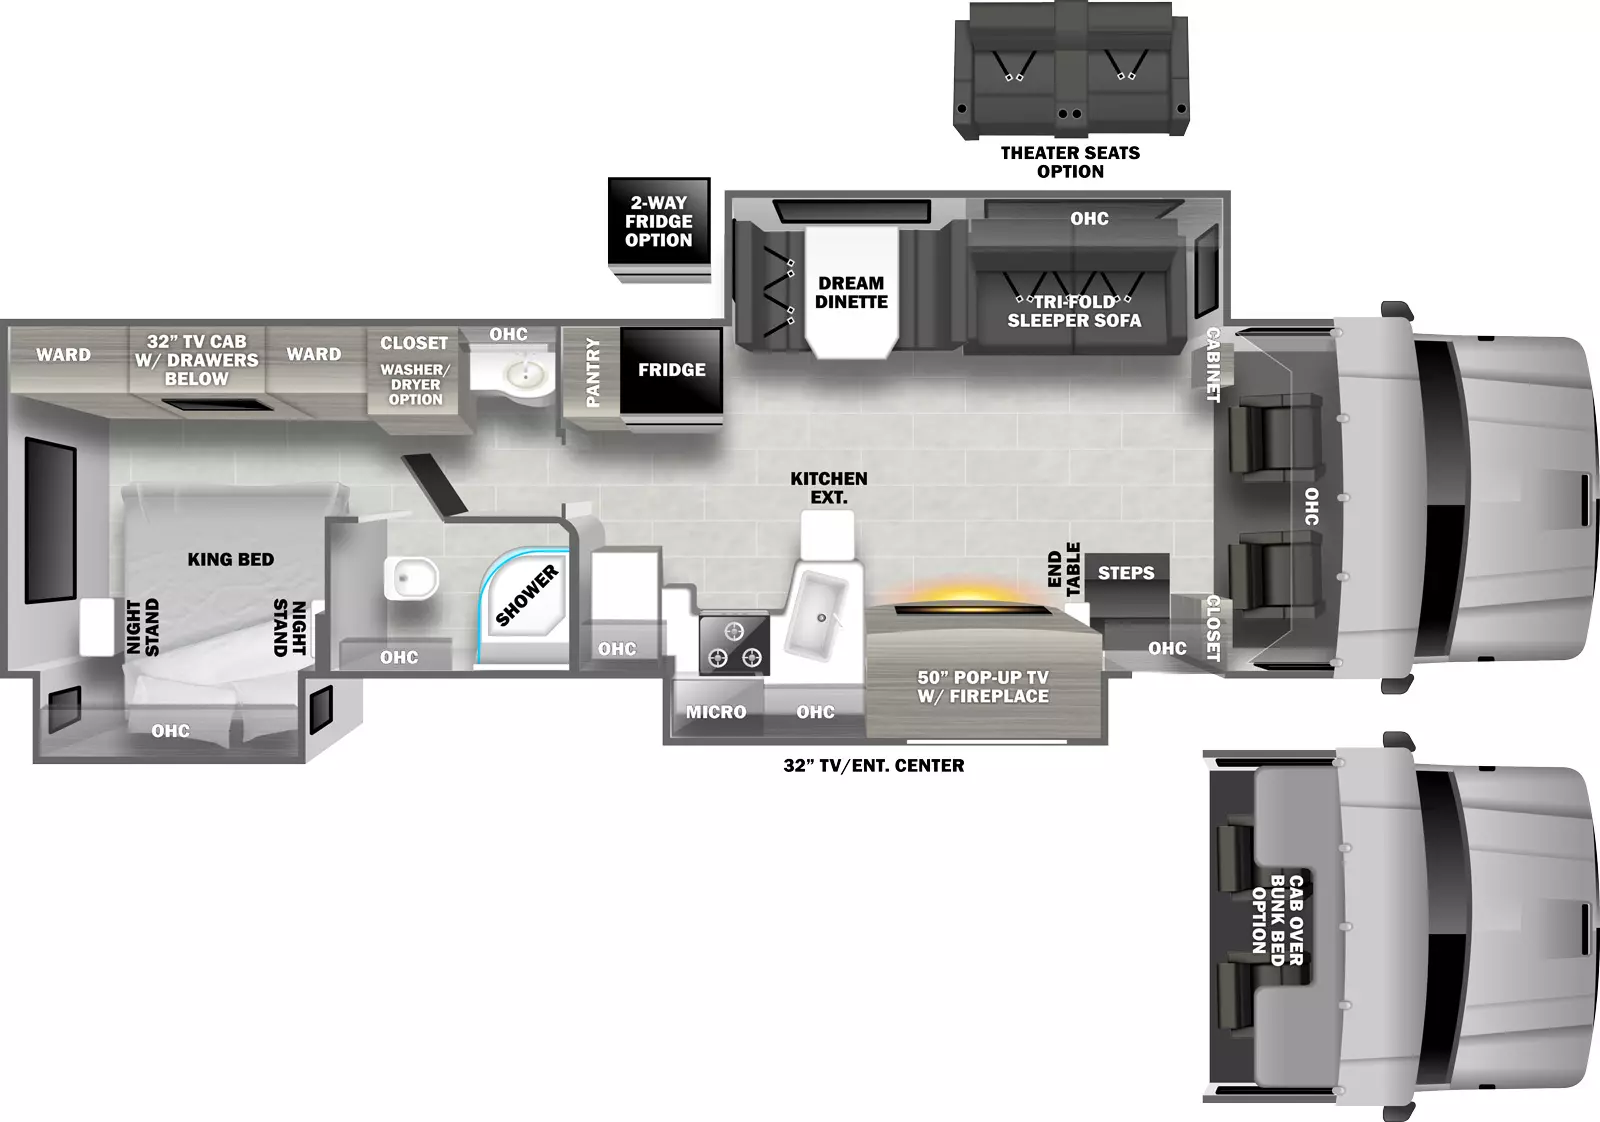 The 3801TS has 3 slide-outs; 1 off-door side, 2 door side. Entry door and TV on door side exterior. Interior layout from front to back: Cab overhead cabinets; off-door side slideout with sleeper sofa, overhead cabinets and dream dinette; off-door side refrigerator, pantry, bathroom sink with overhead cabinet, closet washer dryer prep option, wardrobe and TV cabinet with drawers below; door side includes closet, entry steps, end table, door side slide out with pop-up TV with fireplace below, kitchen with double basin sink, countertop extension, overhead cabinets, cook top stove, microwave, side aisle bathroom with shower, toilet and overhead cabinet, rear door side slideout with king bed, night stands on either side, and overhead cabinets; optional cab over bunk beds in place of cabinets, optional theater seats in place of sleeper sofa, and optional two-way refrigerator in place of standard refrigerator